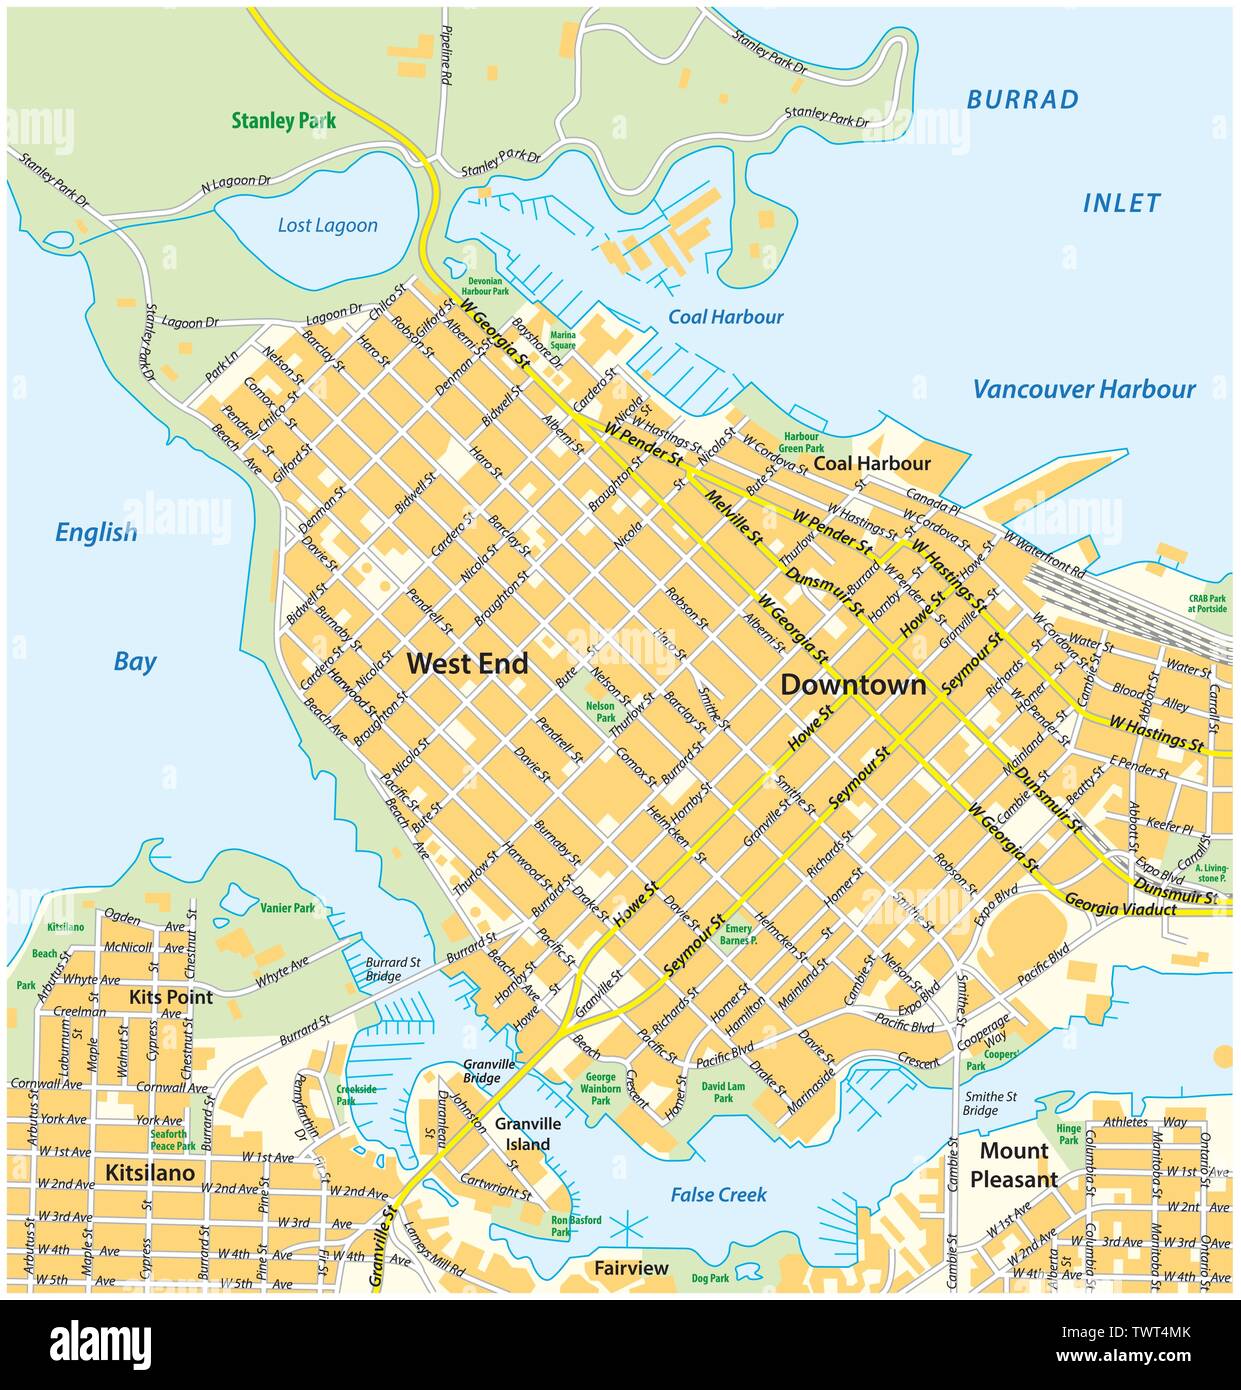 Detailed Street Map Of Downtown Vancouver British Columbia Canada TWT4MK 